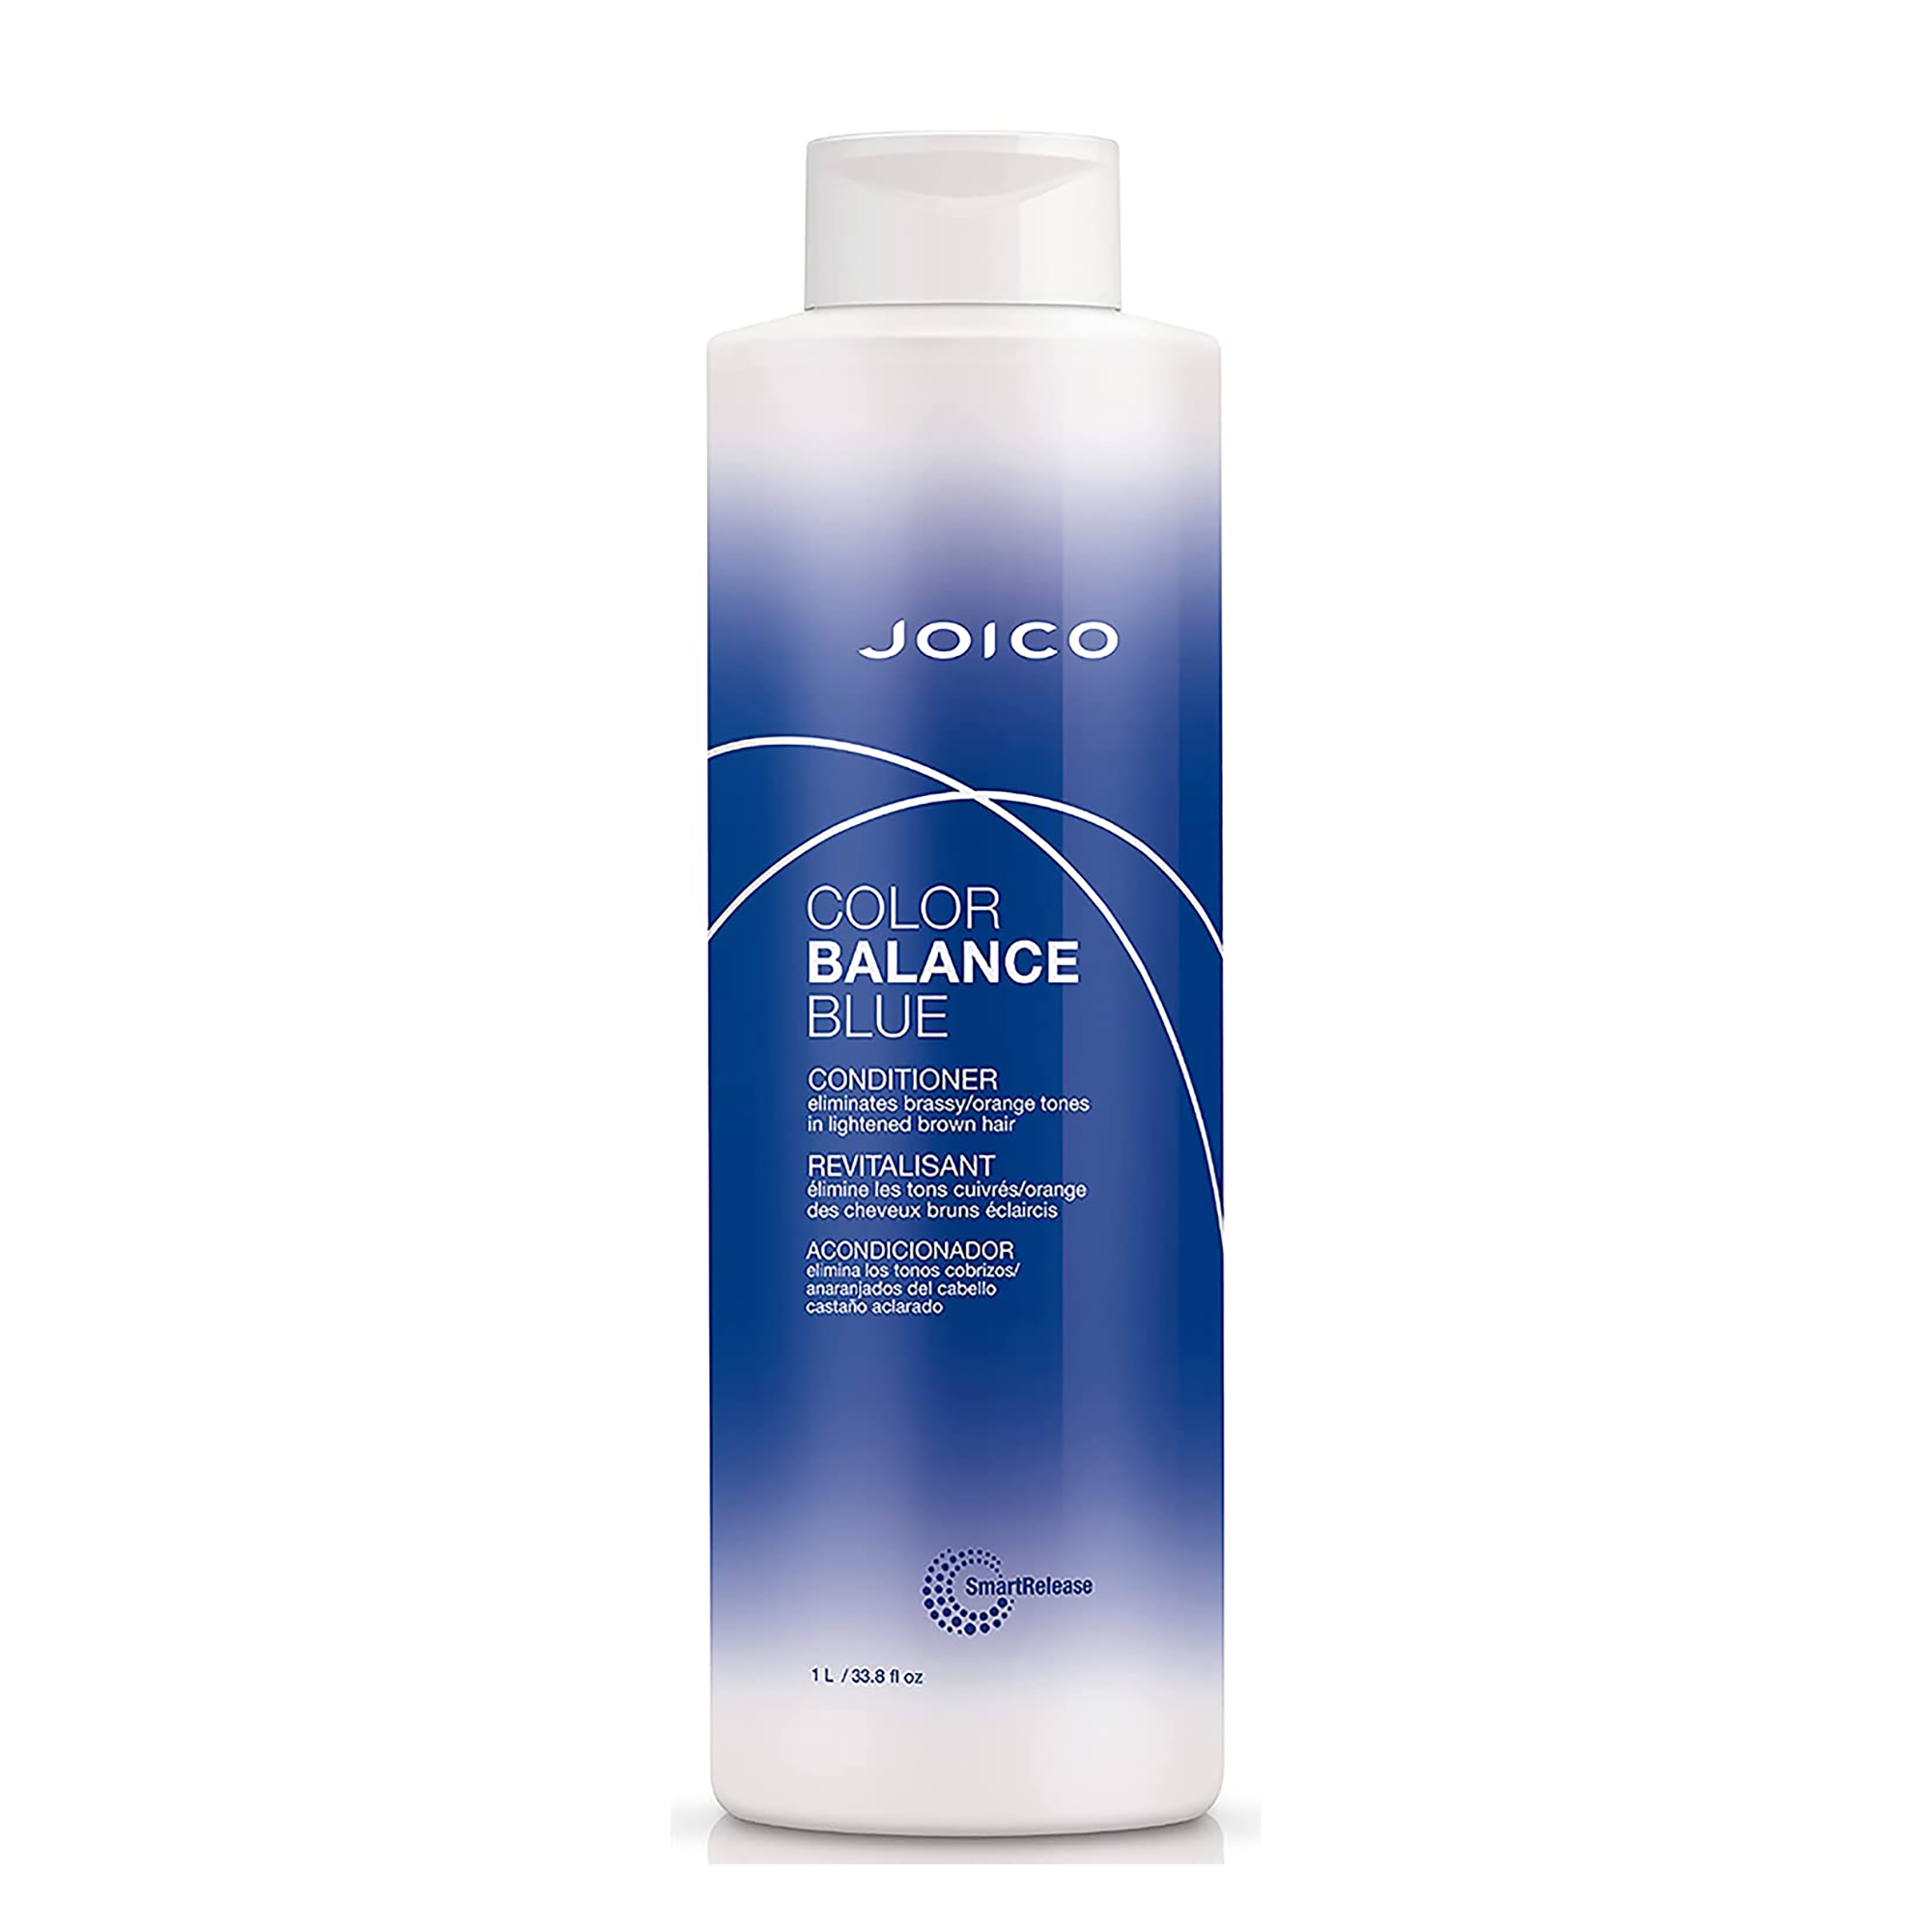 Joico Color Balance Blue Conditioner / 33.8